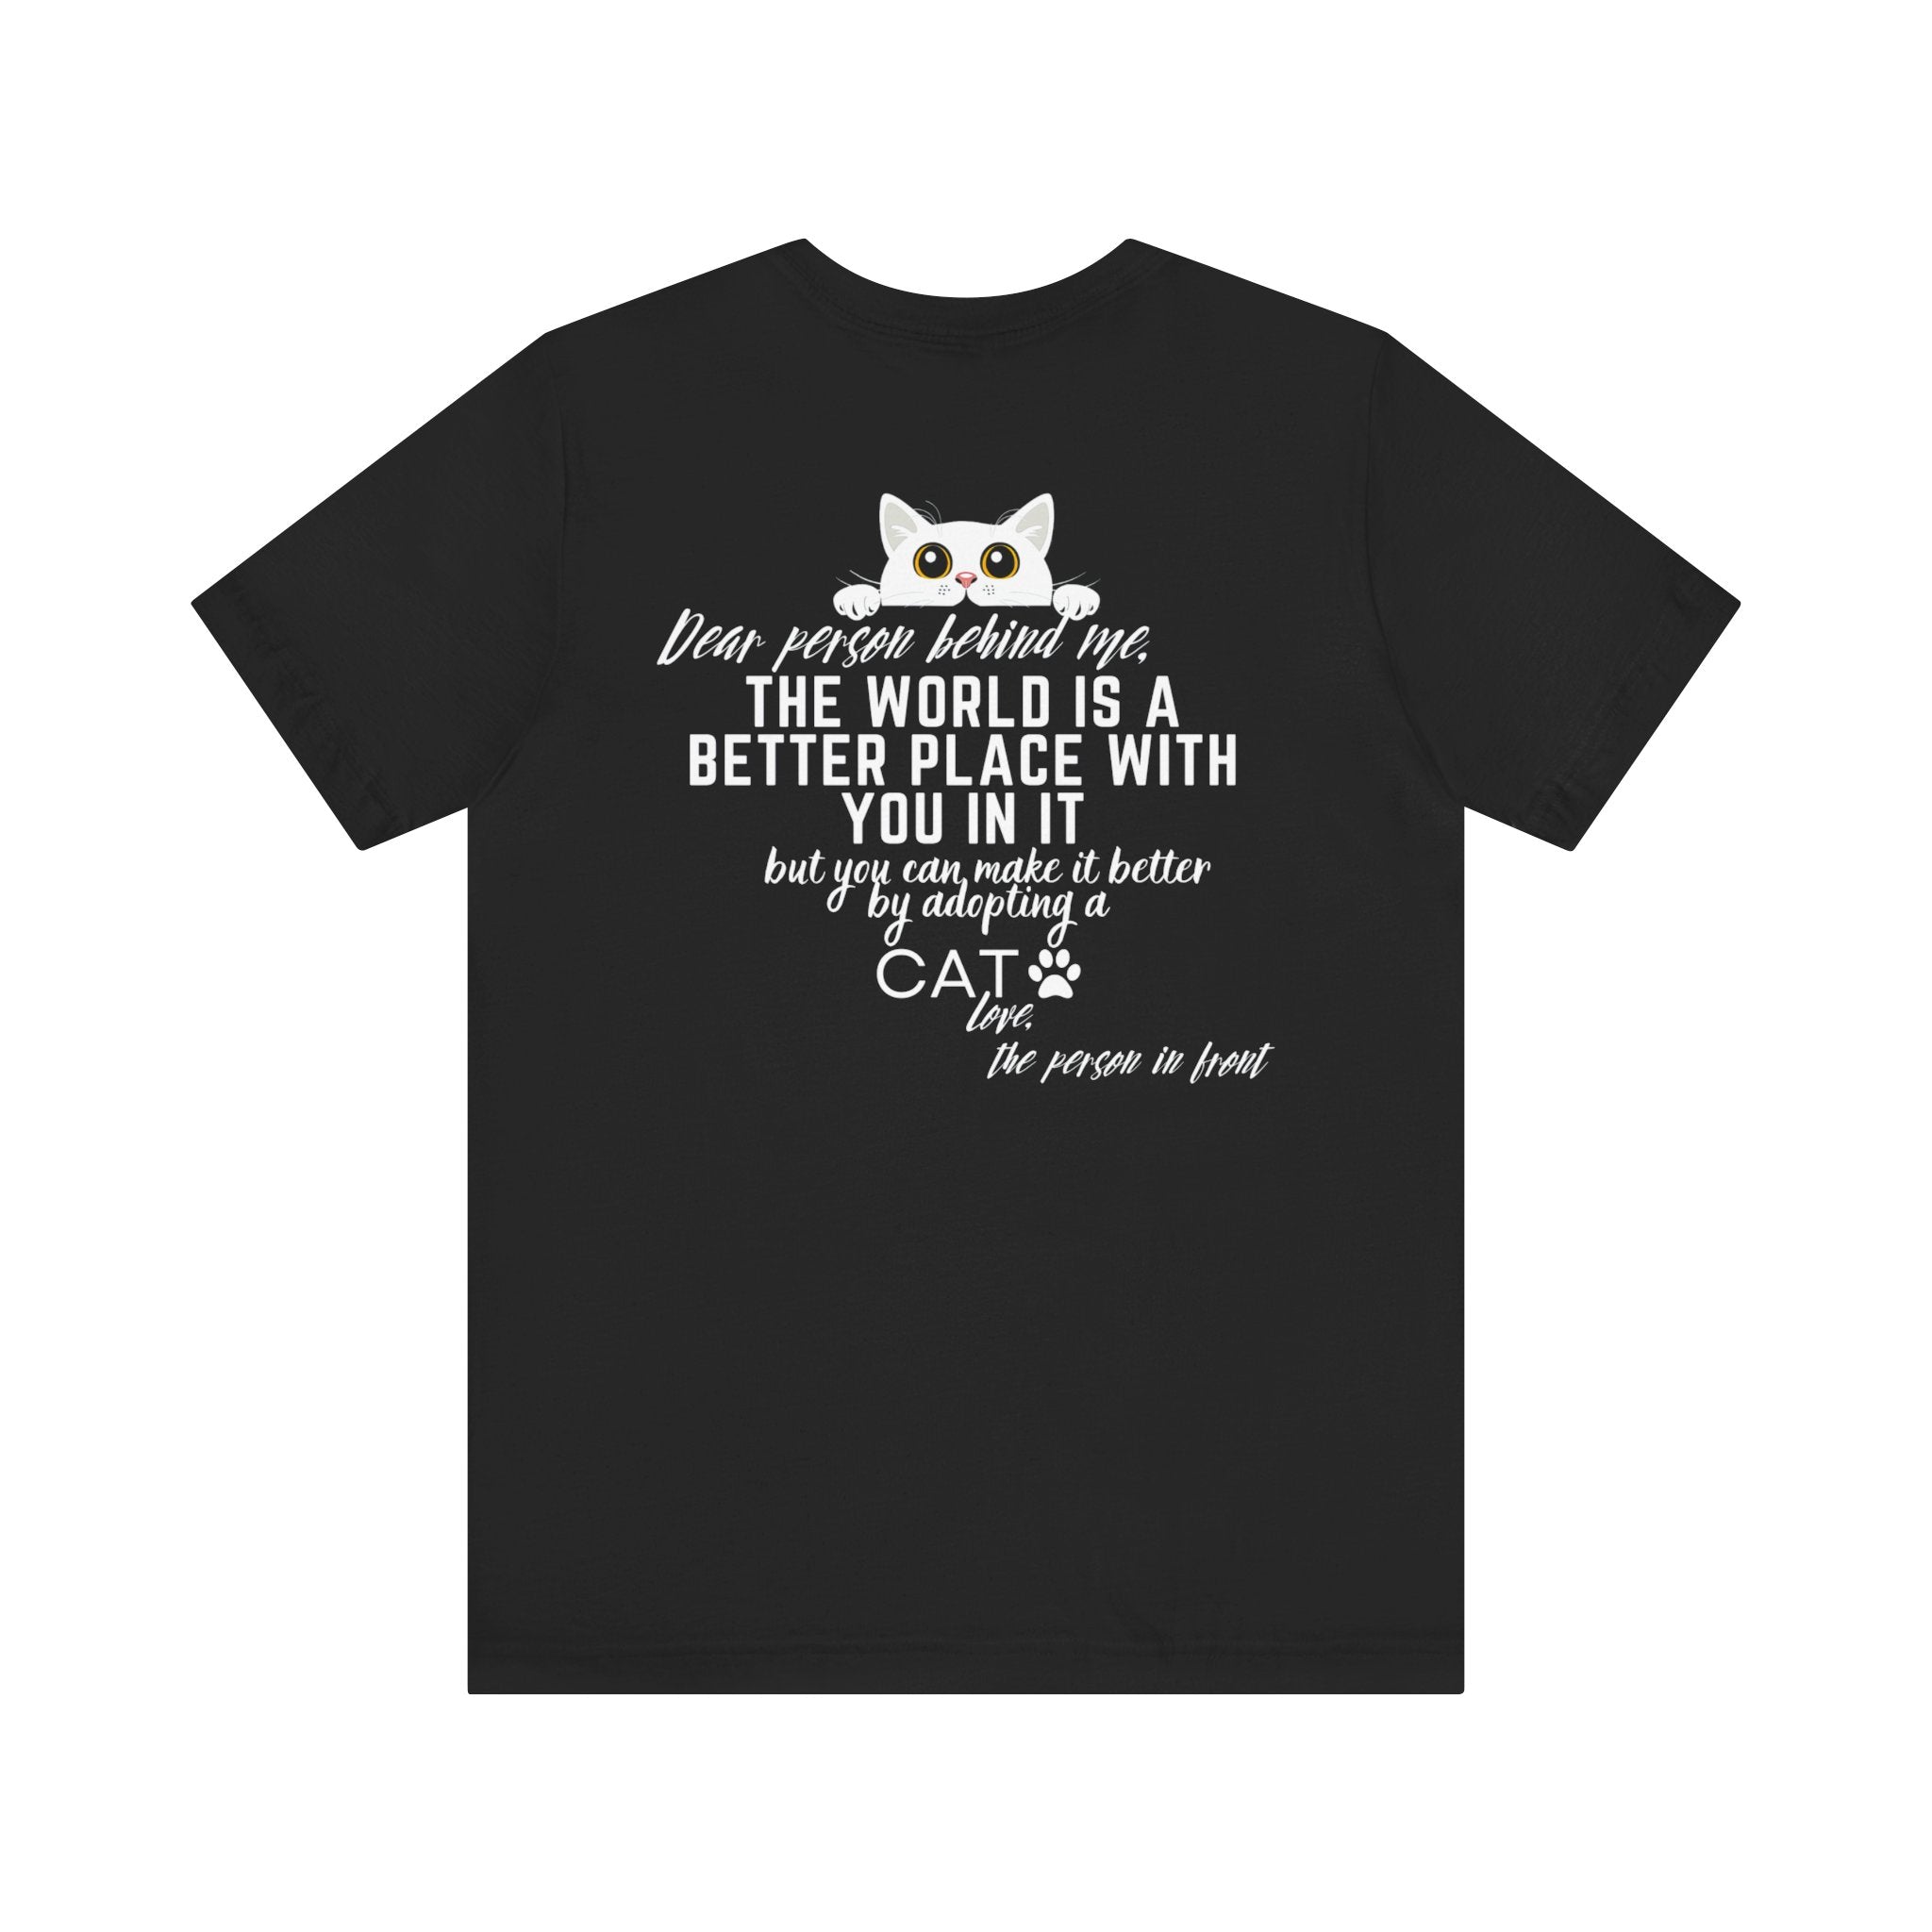 Dear Person Behind Me Cat Adoption T-Shirt Inspirational Graphic Tee